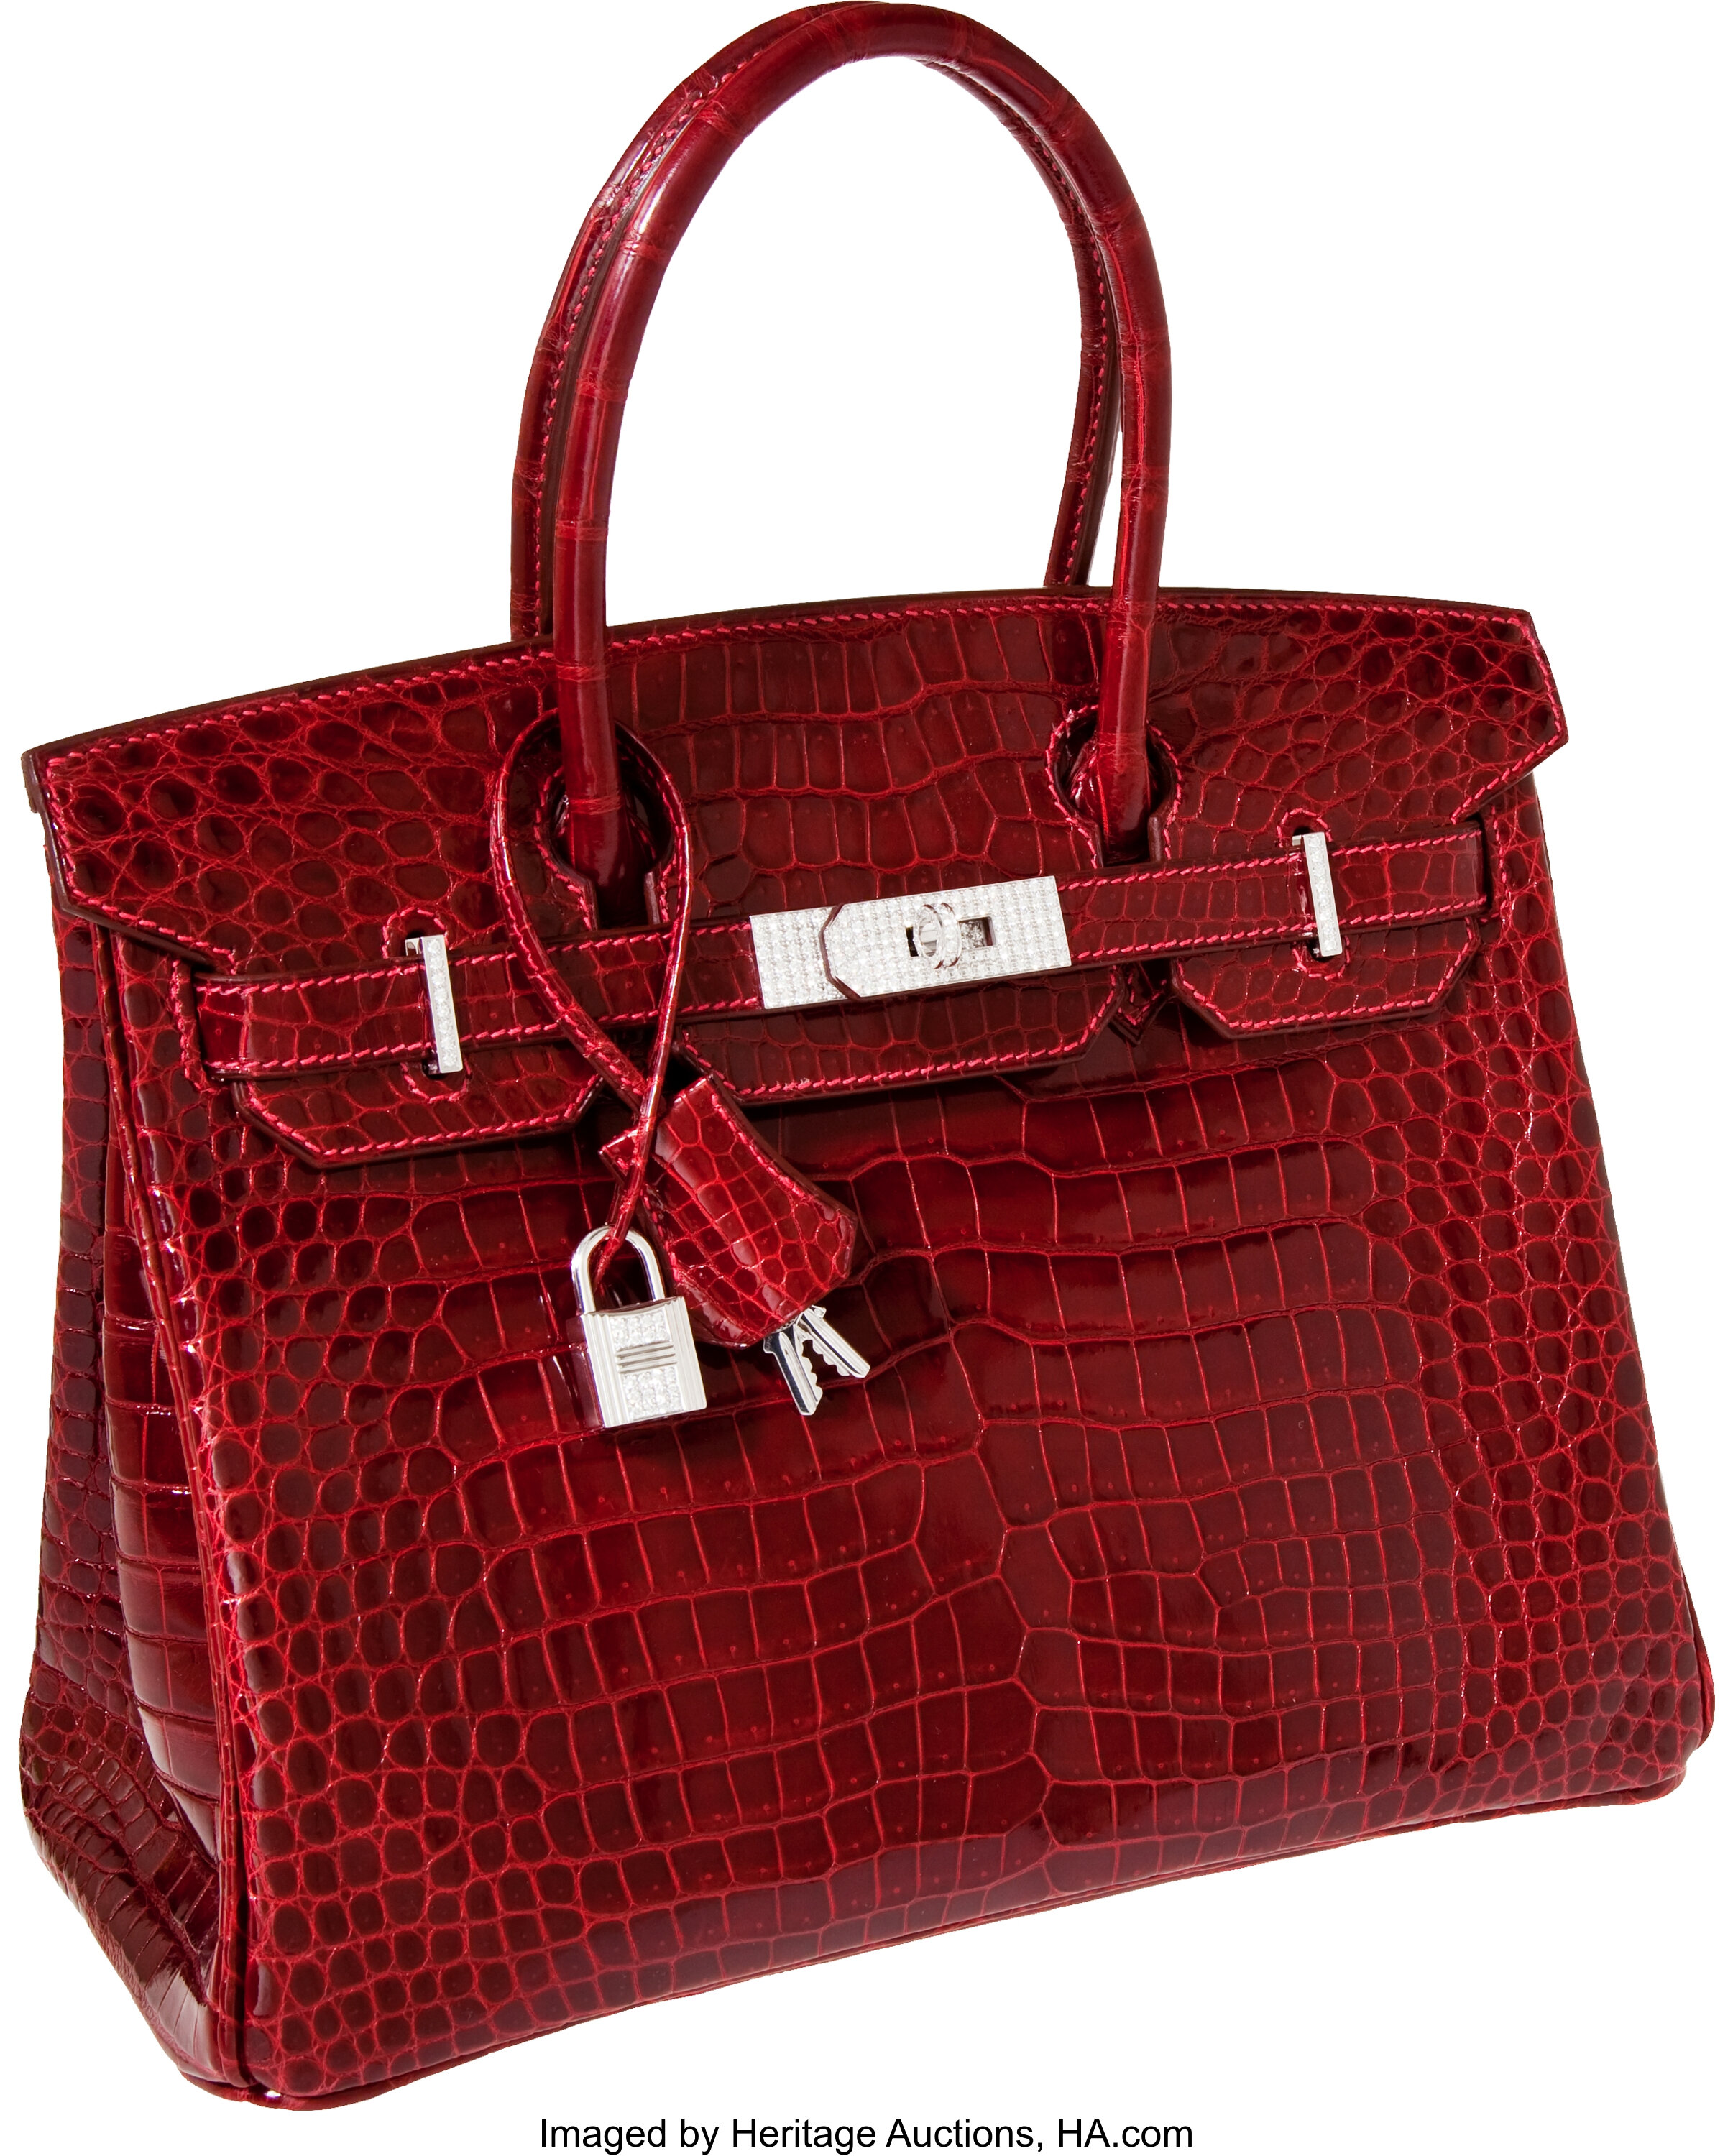 Hermès Bags and Accessories for Sale | Value Guide | Heritage Auctions